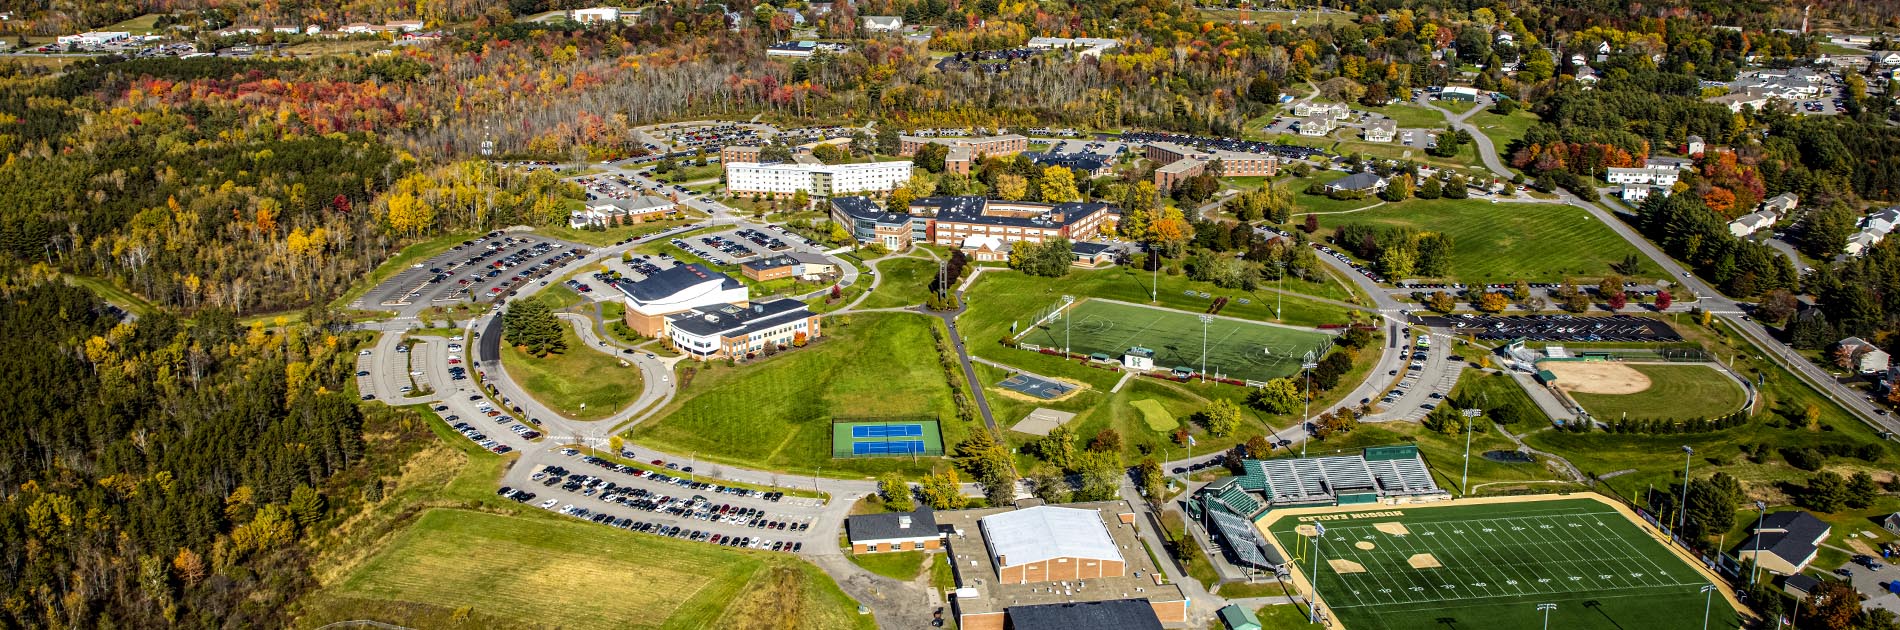 Panoramic image of Husson campus